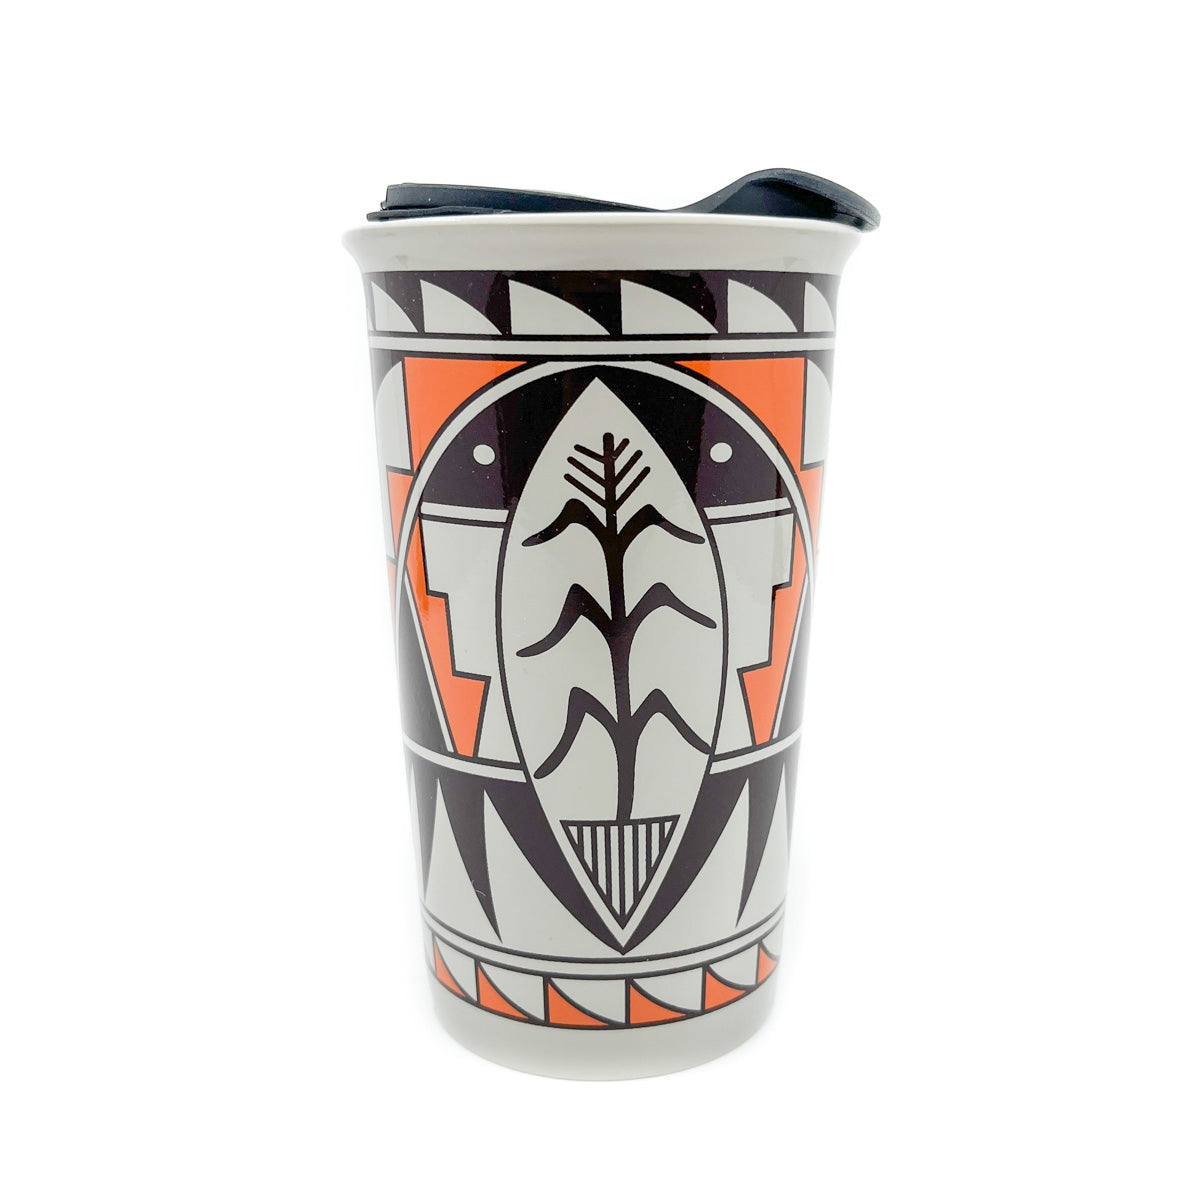 ﻿Traditional pottery design by Juanita C. Fragua from Jemez Pueblo, NM 12 oz. ceramic Travel Style mug, includes press-in suction lid Enclosed card with photo and information on the artist Your purchase supports the Indian Pueblo Cultural Center Note: Please hand wash, not for use in microwave 